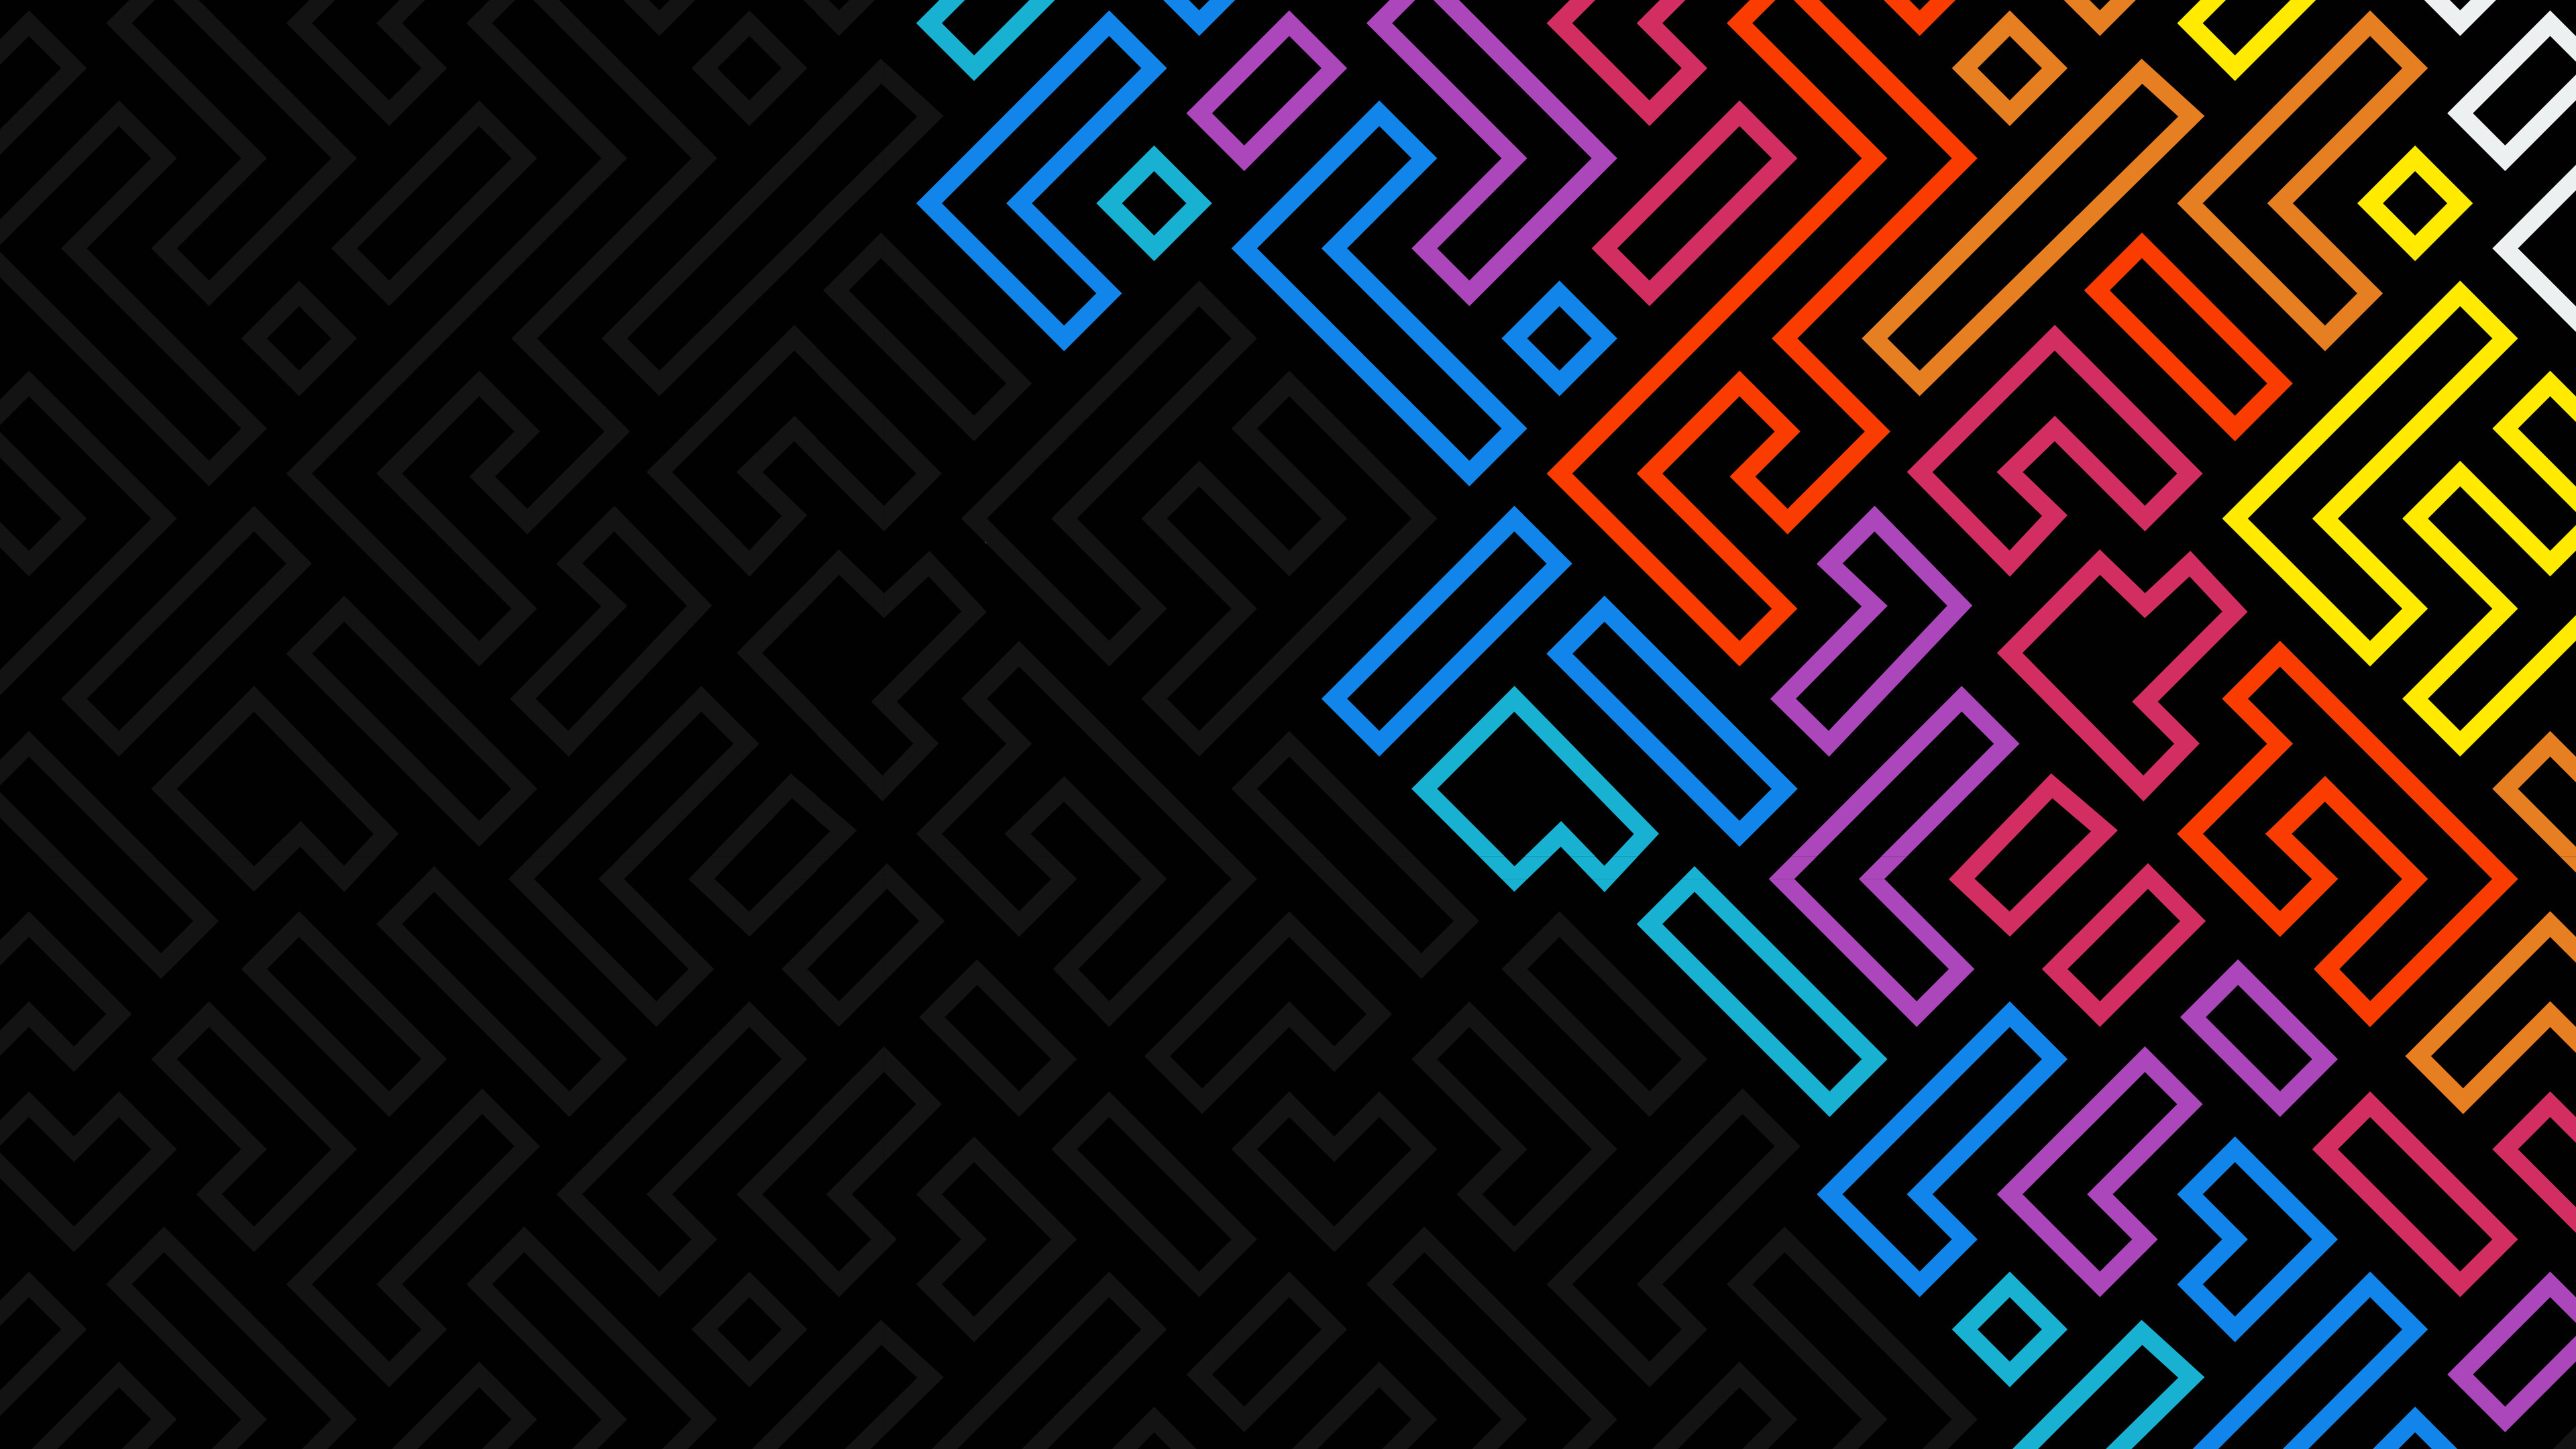 Abstract 4K wallpaper for your desktop or mobile screen free and easy to download